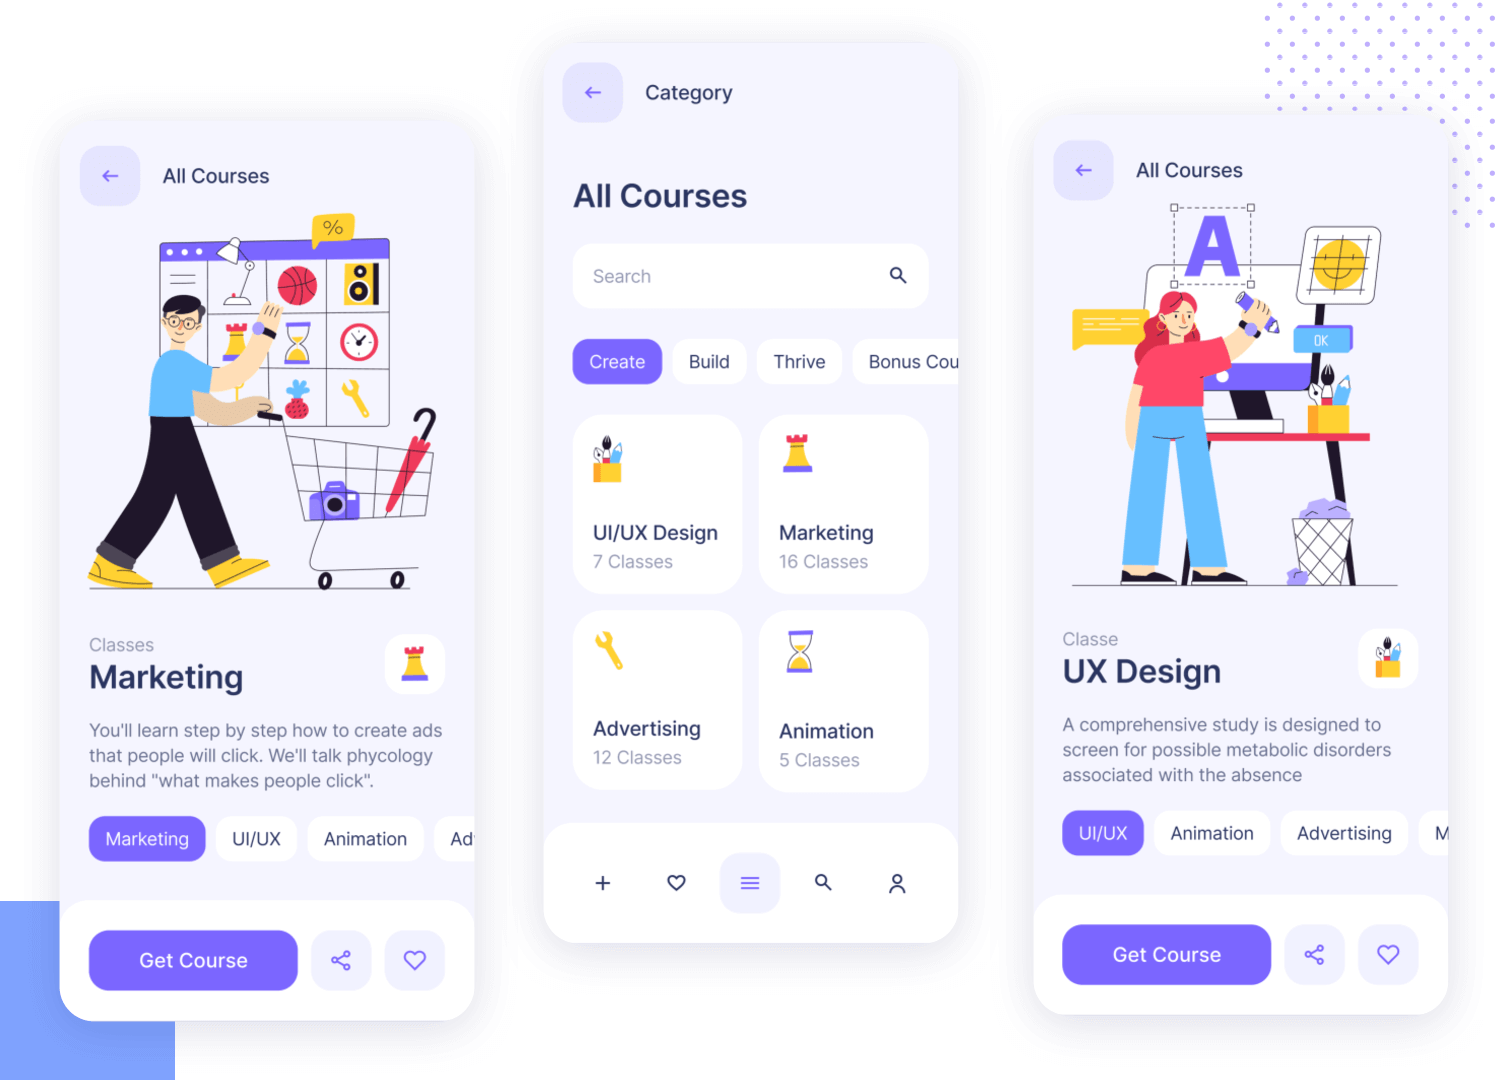 Mobile app UI showcasing course categories with vibrant buttons for Marketing, UX Design, and more